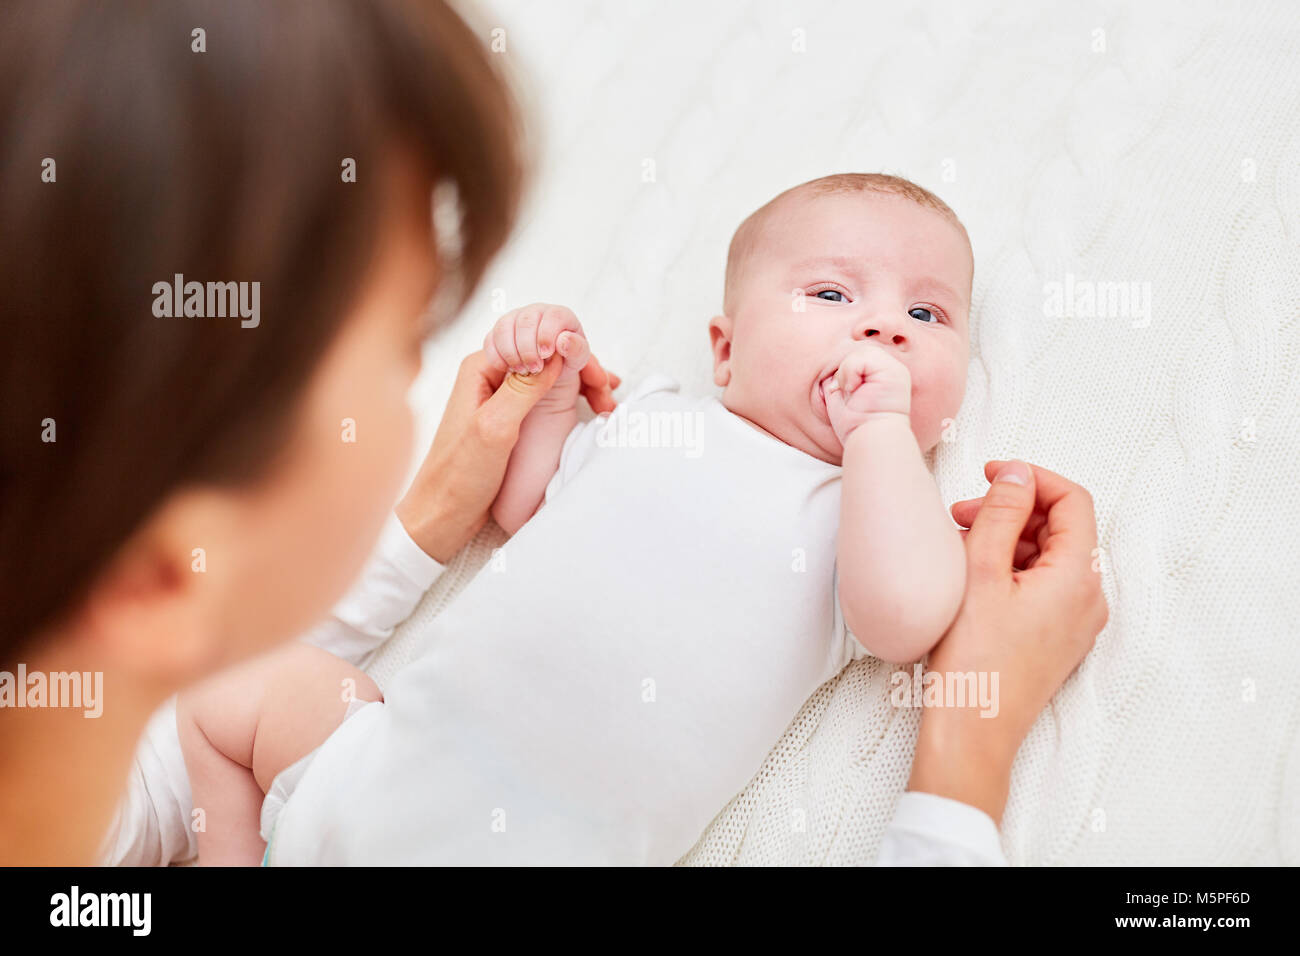 Newborn baby falling asleep lies with one finger in his hand Stock Photo